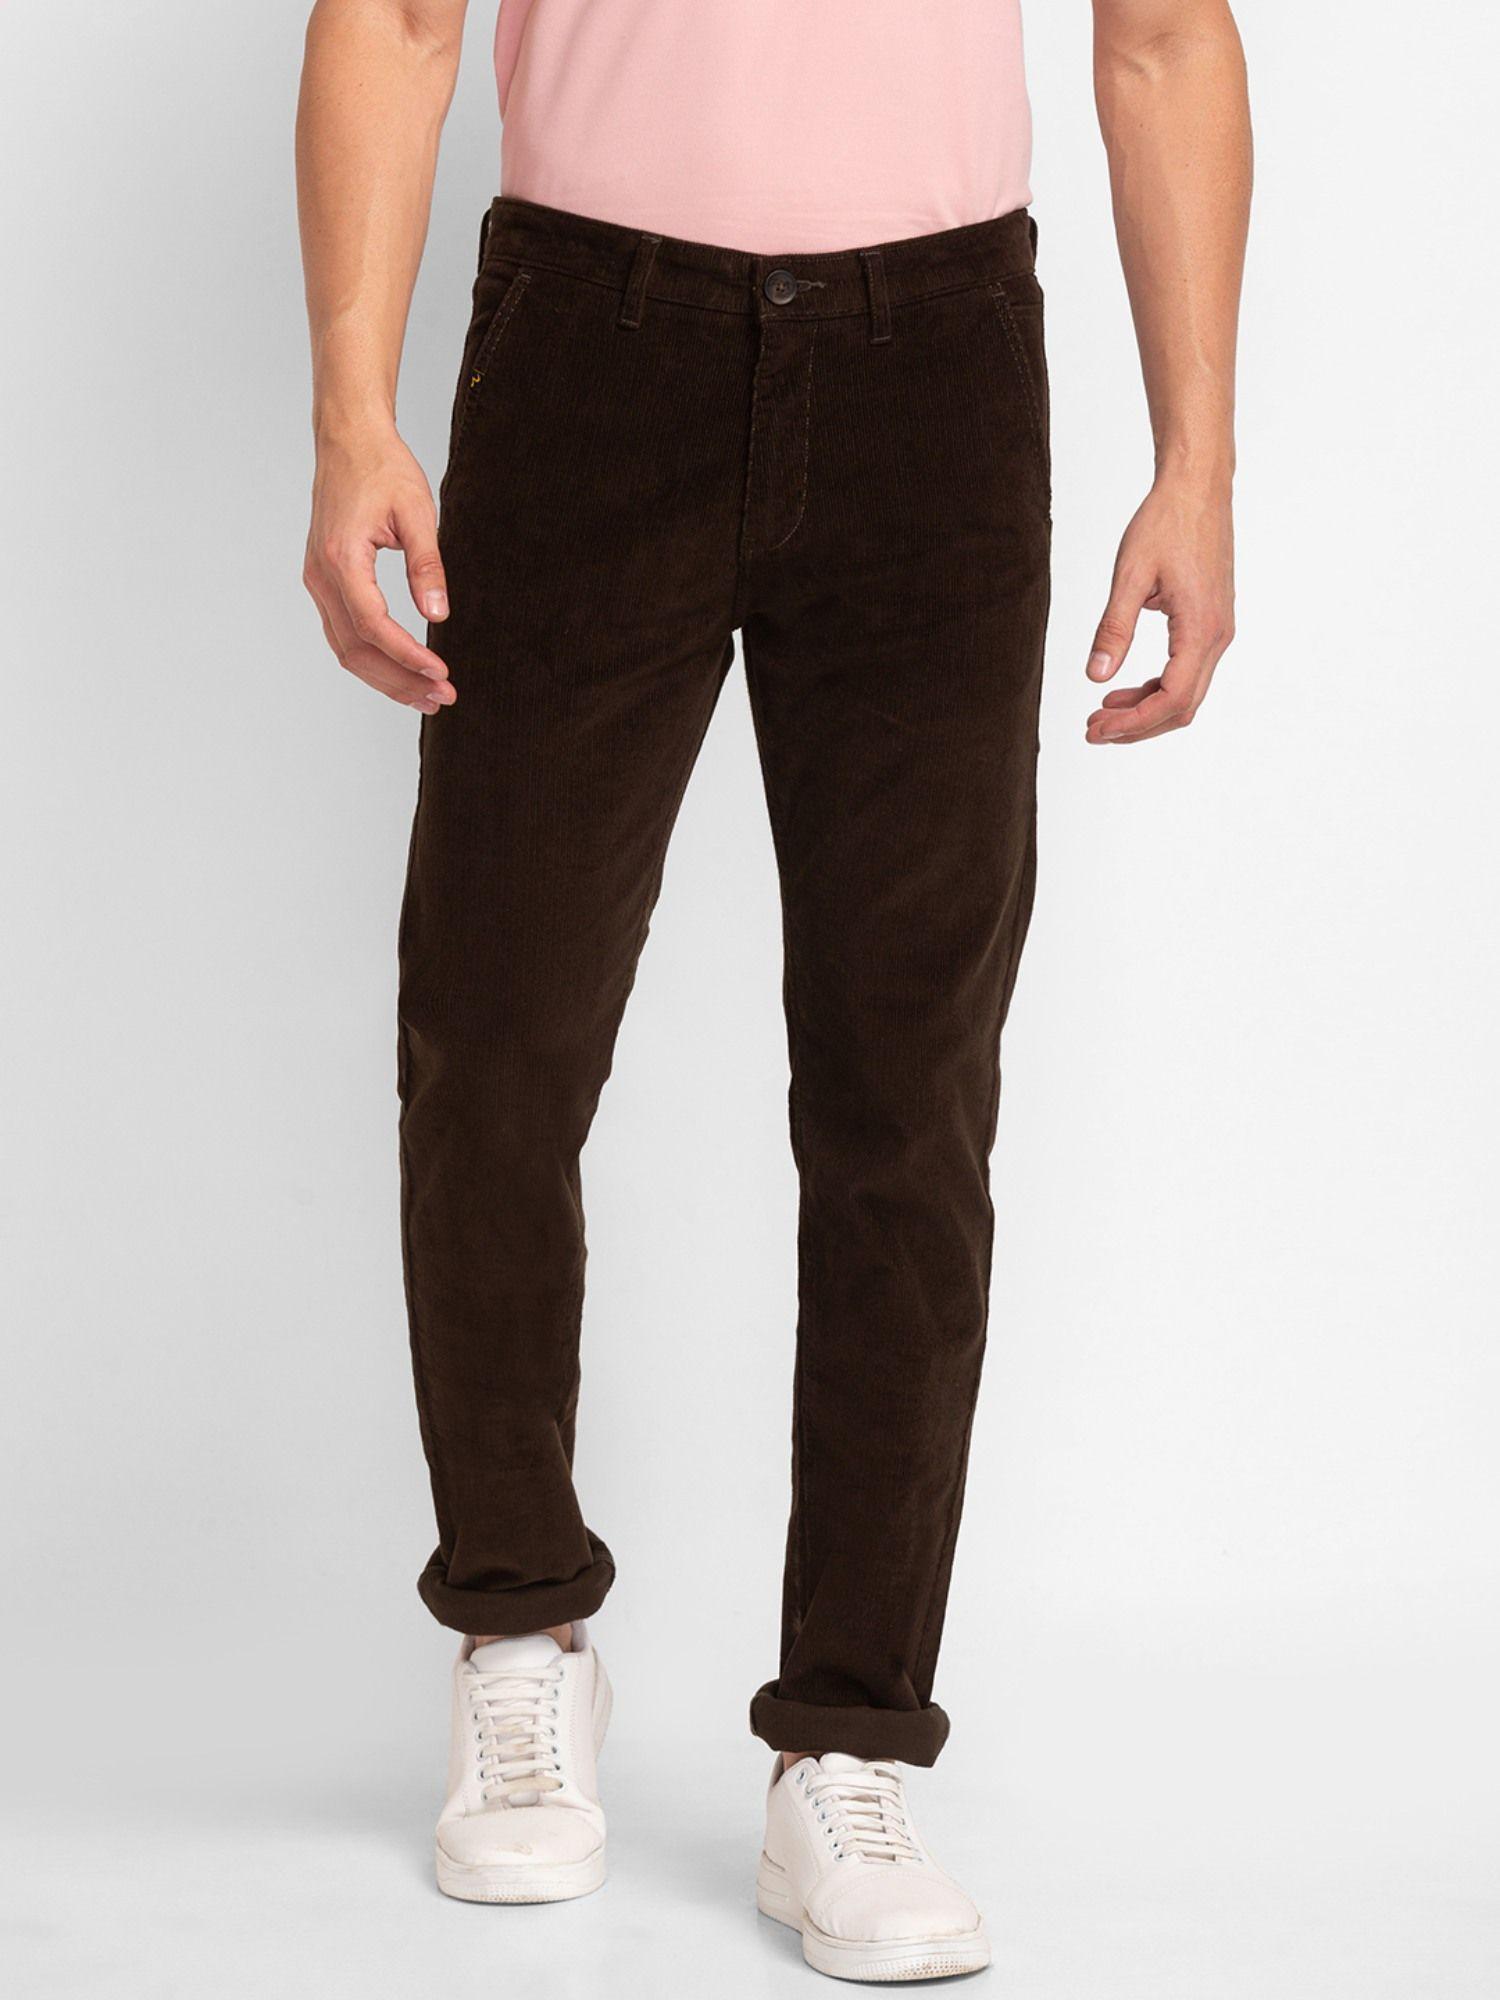 brown-cotton-blend-mid-rise-trousers-for-men